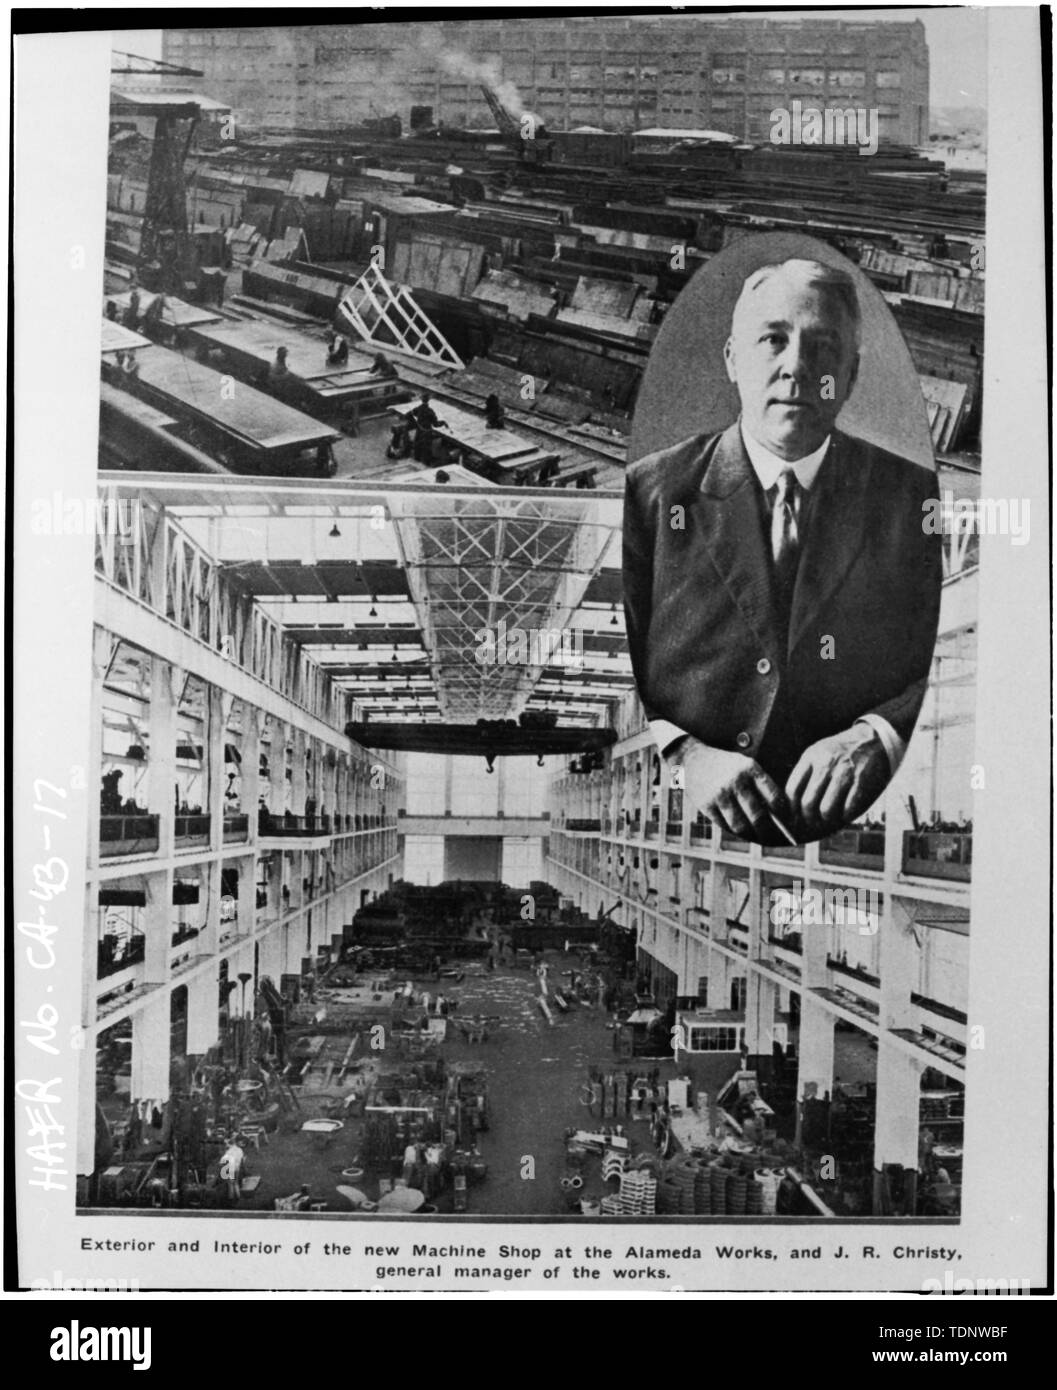 Photocopy of Photograph (From Bethlehem Shipbuilding Ltd., New York, New York, 1919) COMPOSITE PHOTOGRAPH SHOWING AN EXTERIOR AND INTERIOR VIEW OF THE MACHINE SHOP AND AN INSET OF THE GENERAL MANAGER - Union Iron Works Turbine Machine Shop, 2200 Webster Street, Alameda, Alameda County, CA Stock Photo